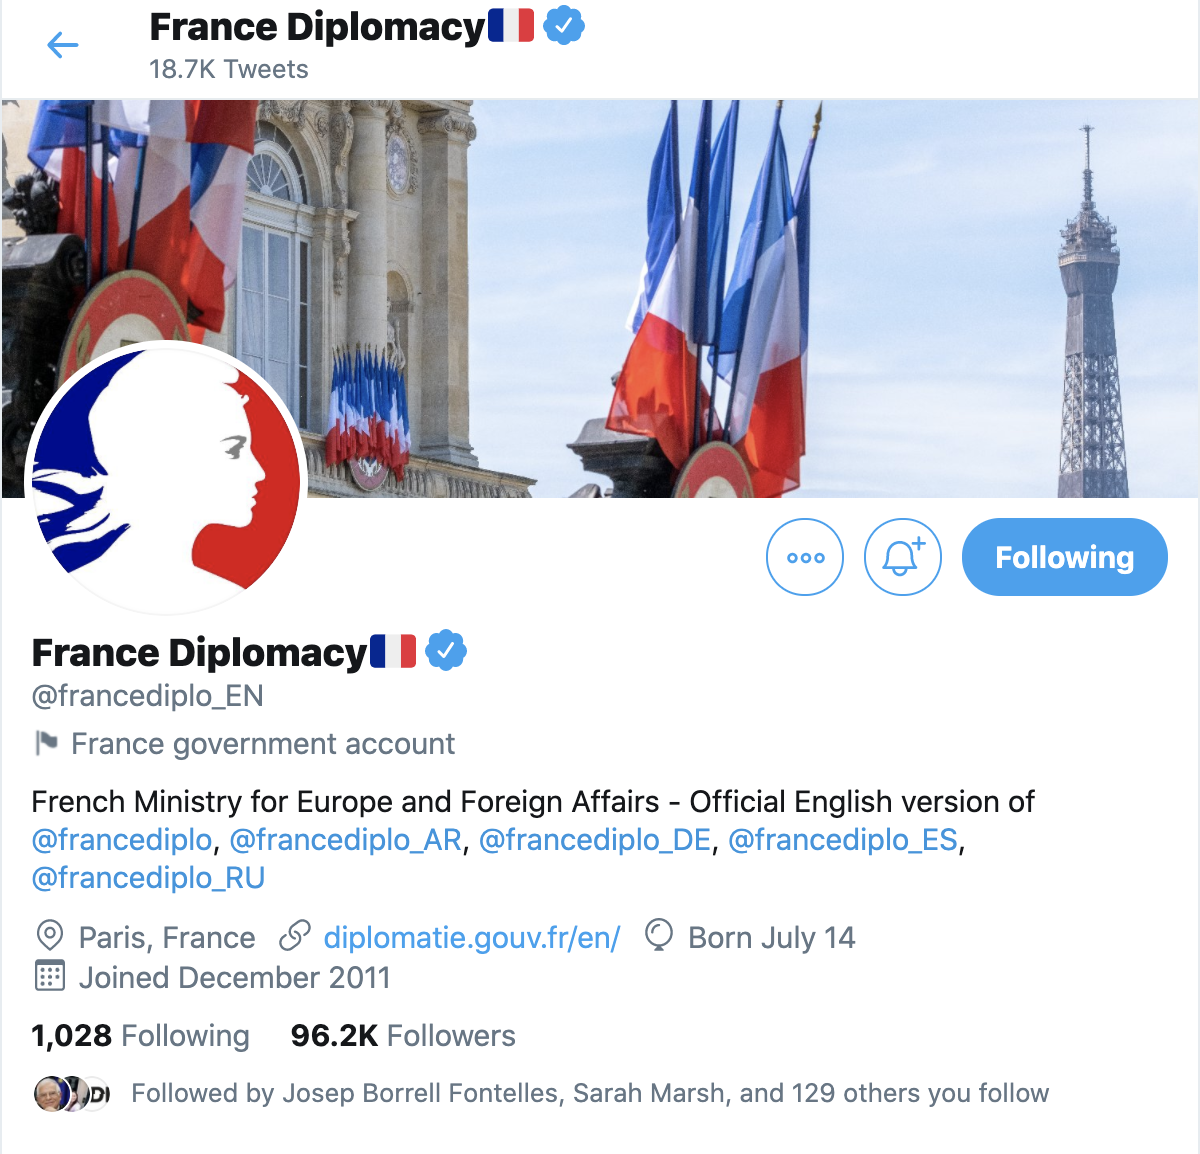 The French Ministry of Europe and Foreign Affairs, the German Foreign Office, the Russian and Chinese Ministry of Foreign Affairs have all been labelled